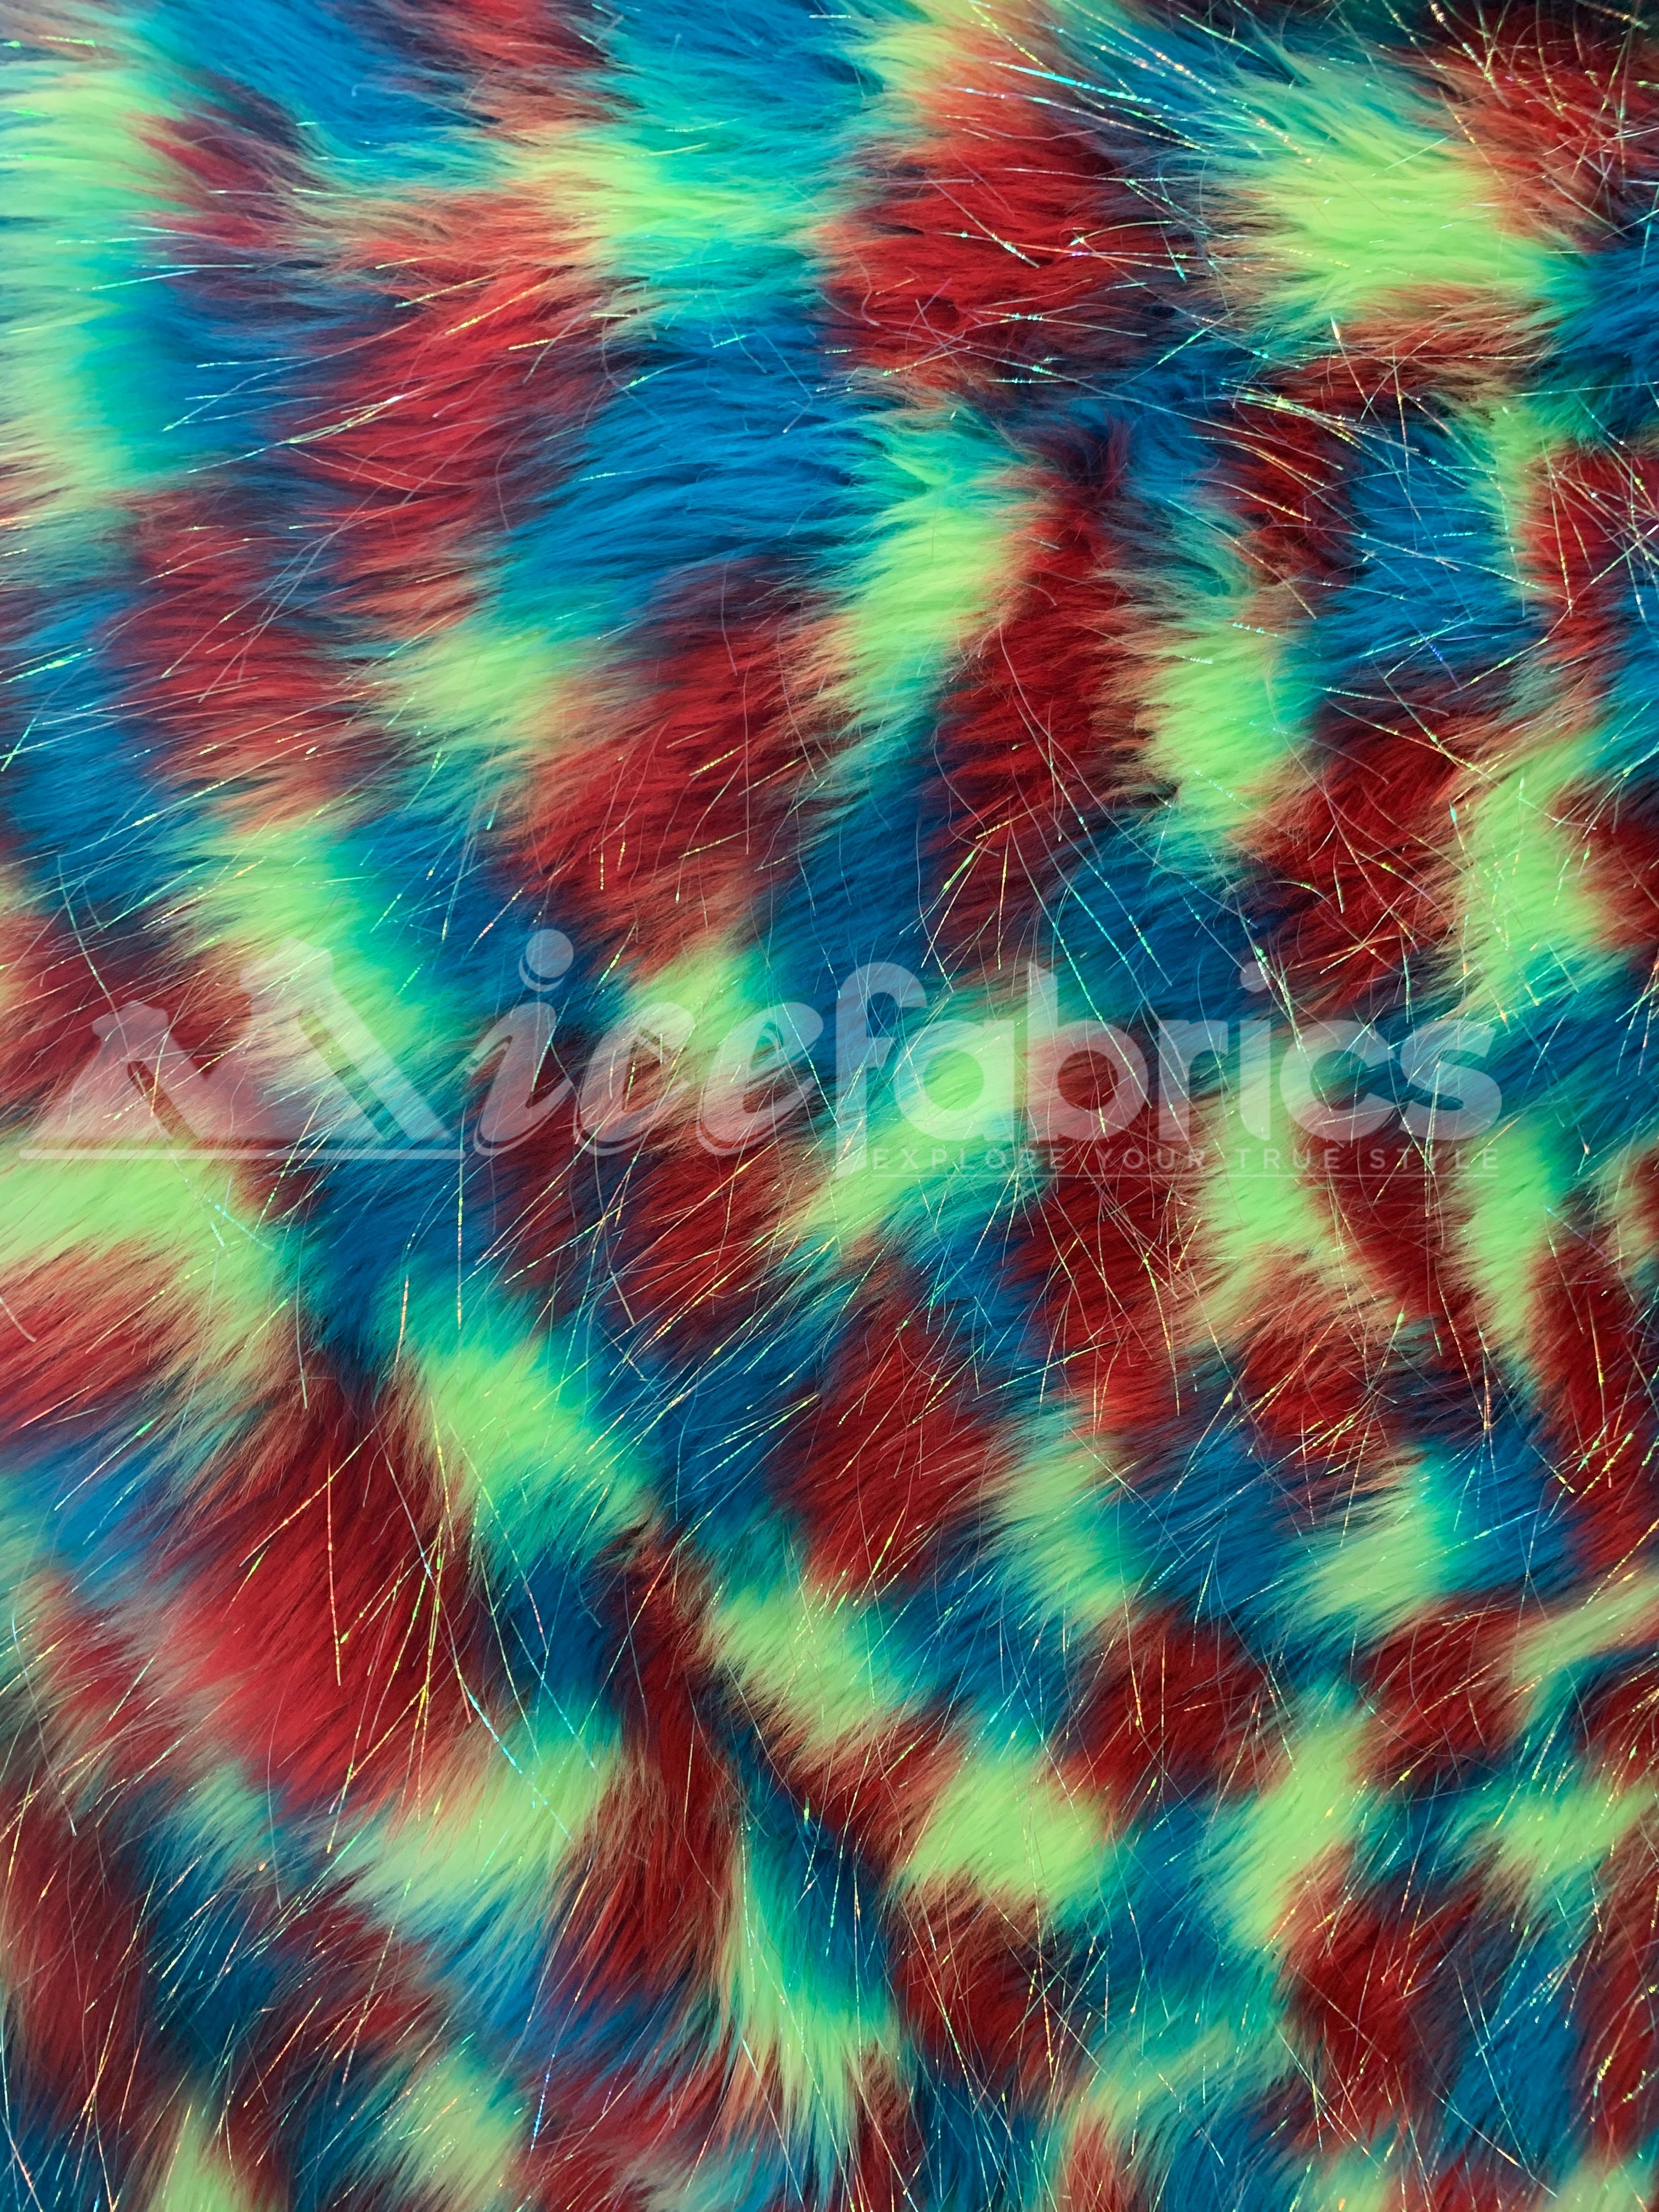 3 Tone Rainbow Tinsel 3.5" long Pile Red, Blue, and Green Faux Fur Fabric By The YardICEFABRICICE FABRICSBy The Yard (60 inches Wide)3 Tone Rainbow Tinsel 3.5" long Pile Red, Blue, and Green Faux Fur Fabric By The Yard ICEFABRIC